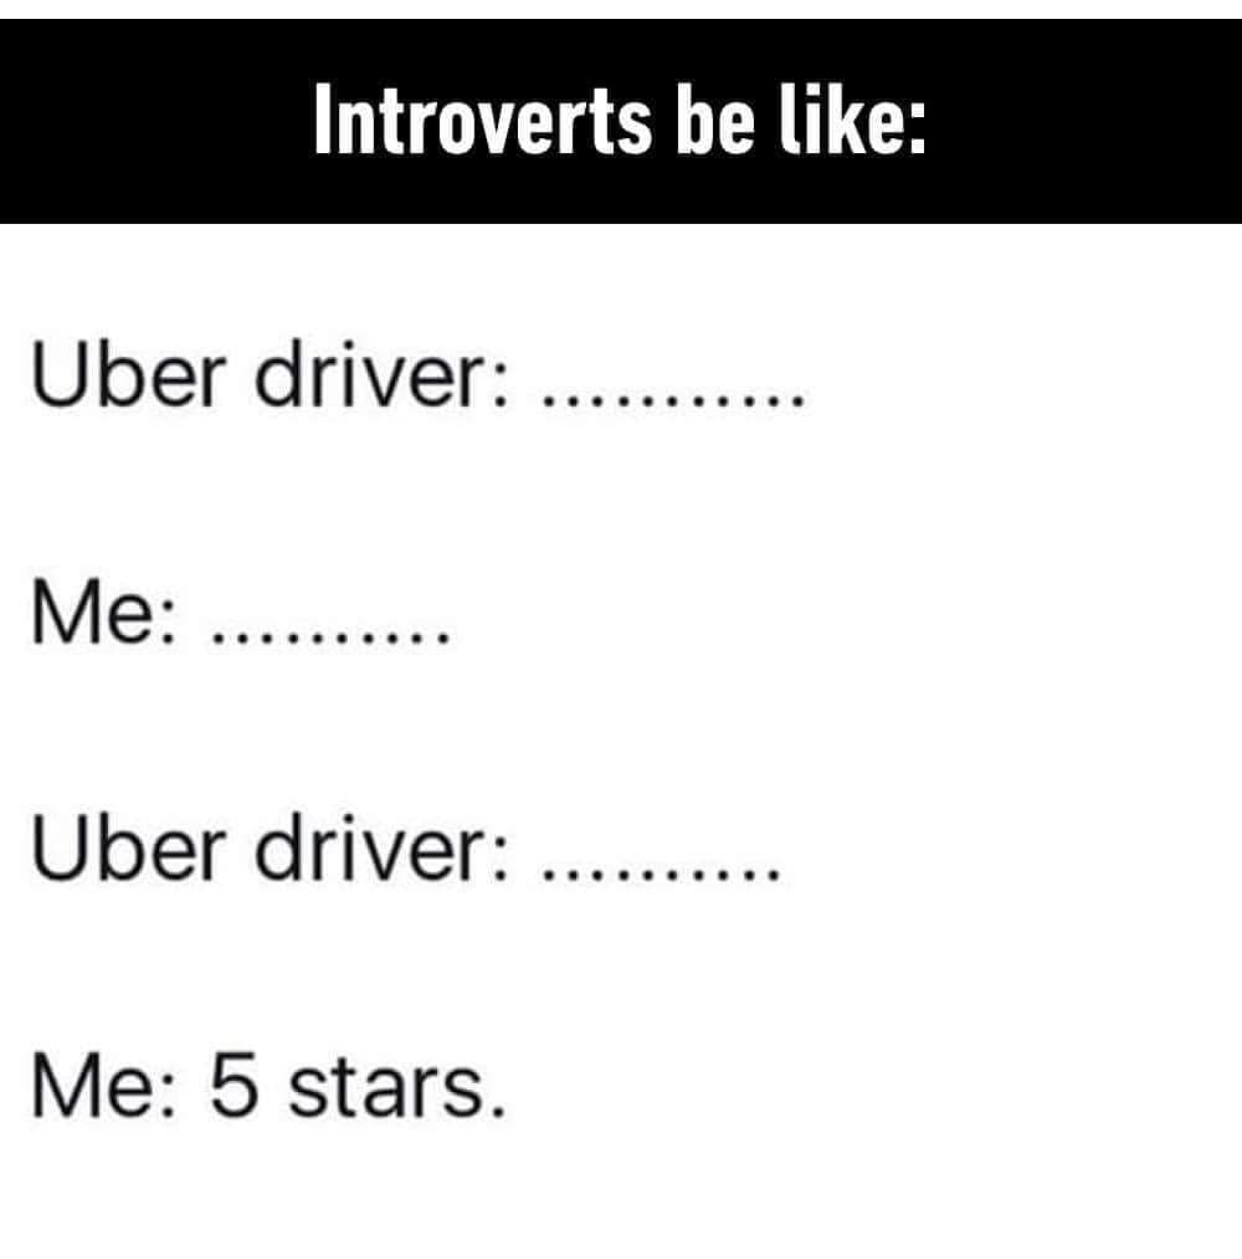 memes - document - Introverts be Uber driver. Me .......... Uber driver.. Me 5 stars.